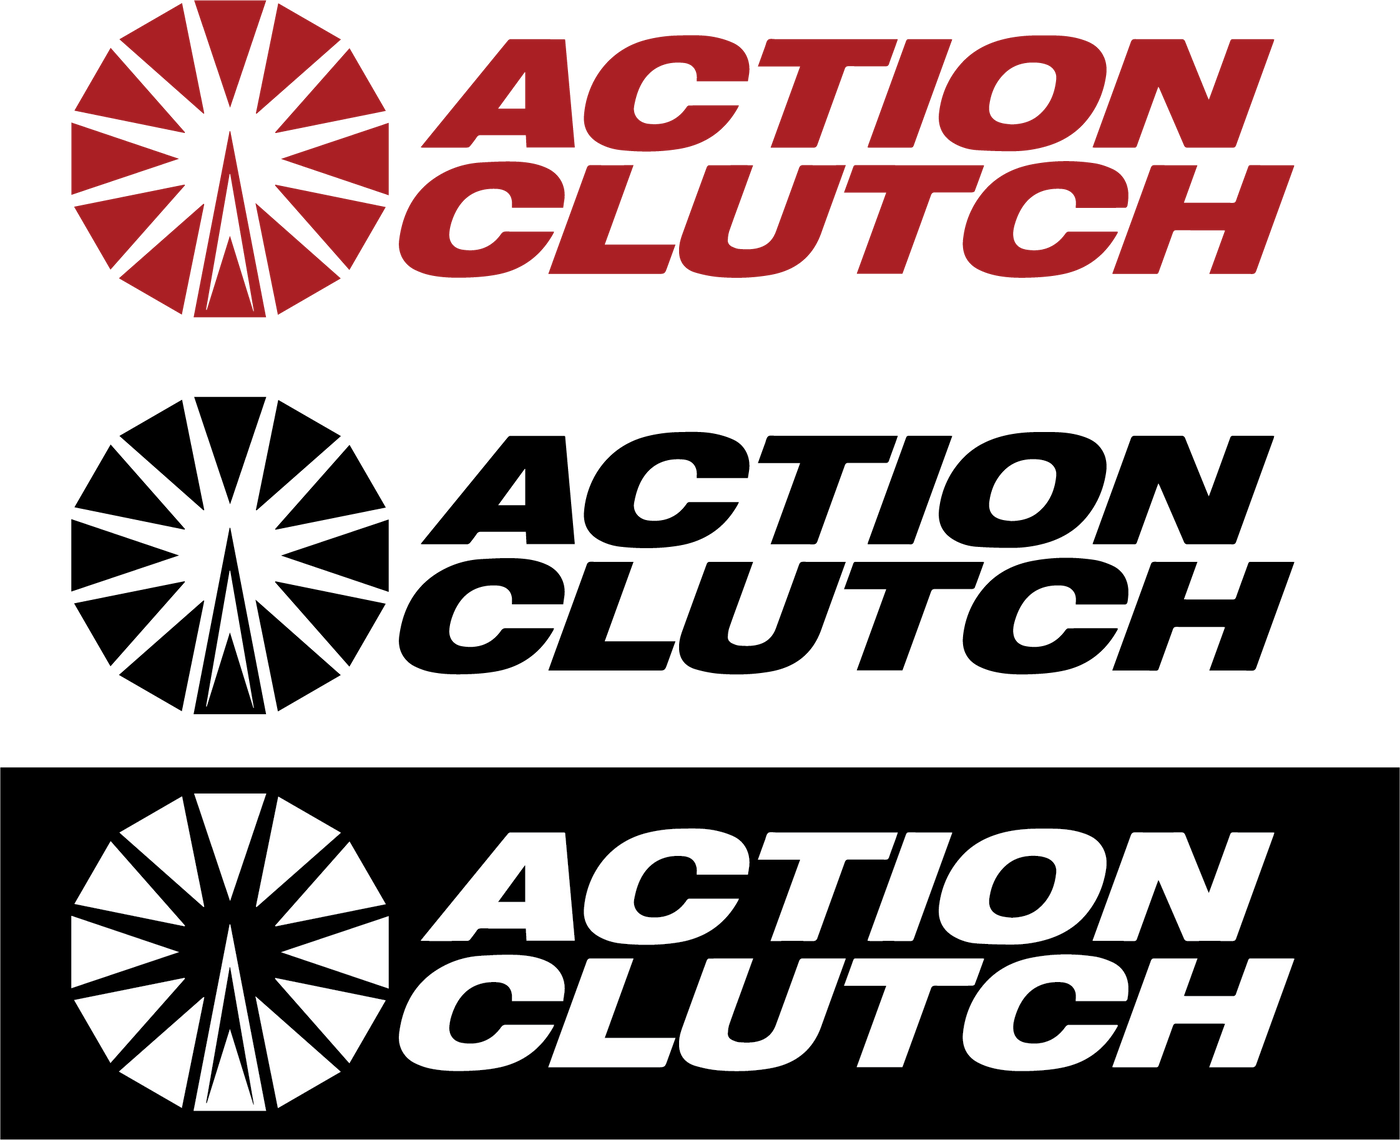 Action Clutch Vinyl Stickers (3 pack) - Action Clutch